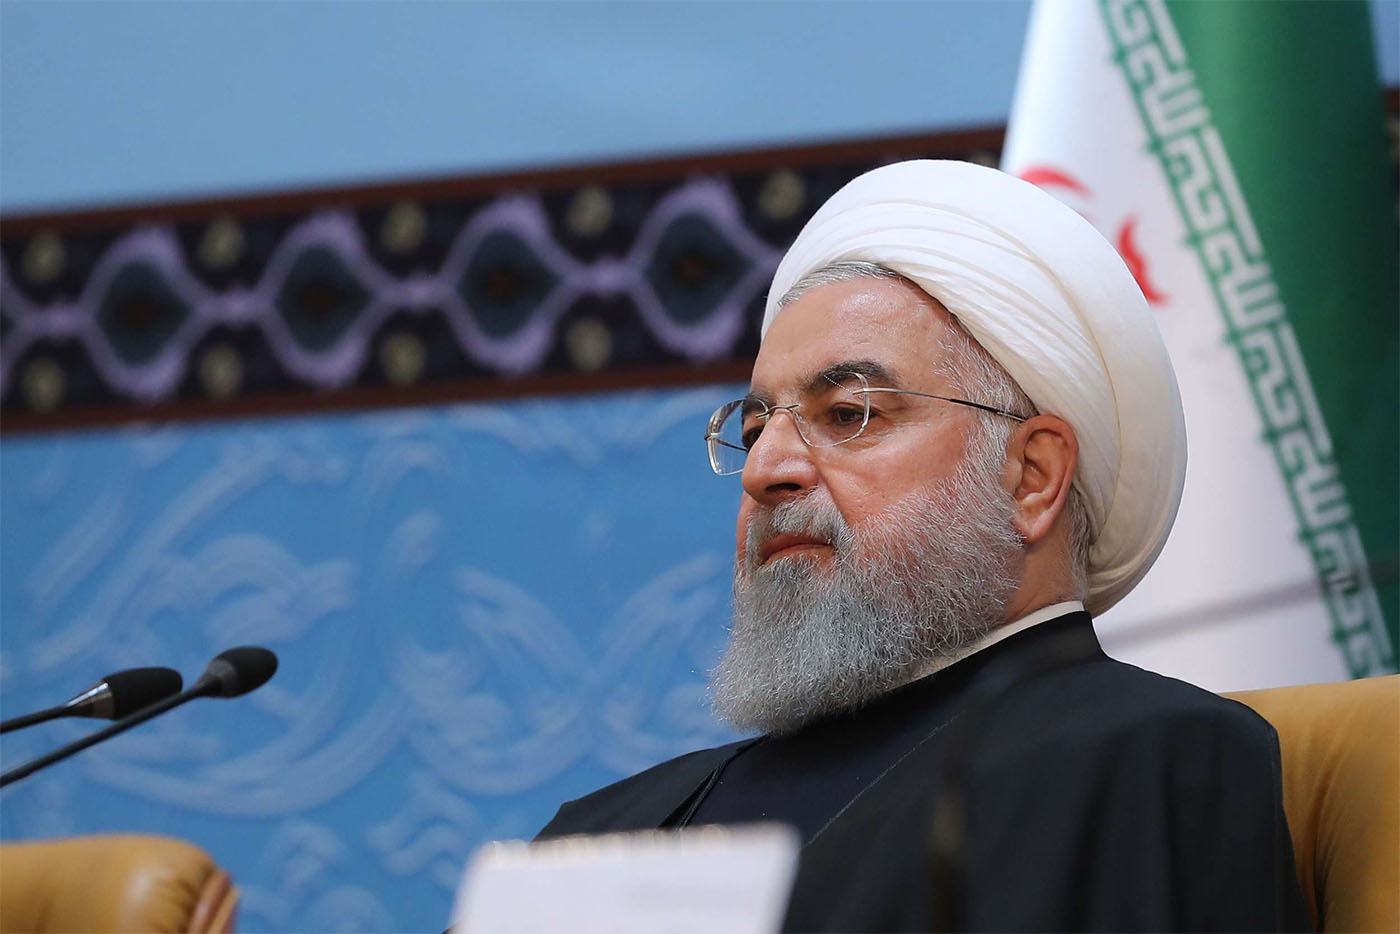 Rouhani downplayed the economic impact of sanctions